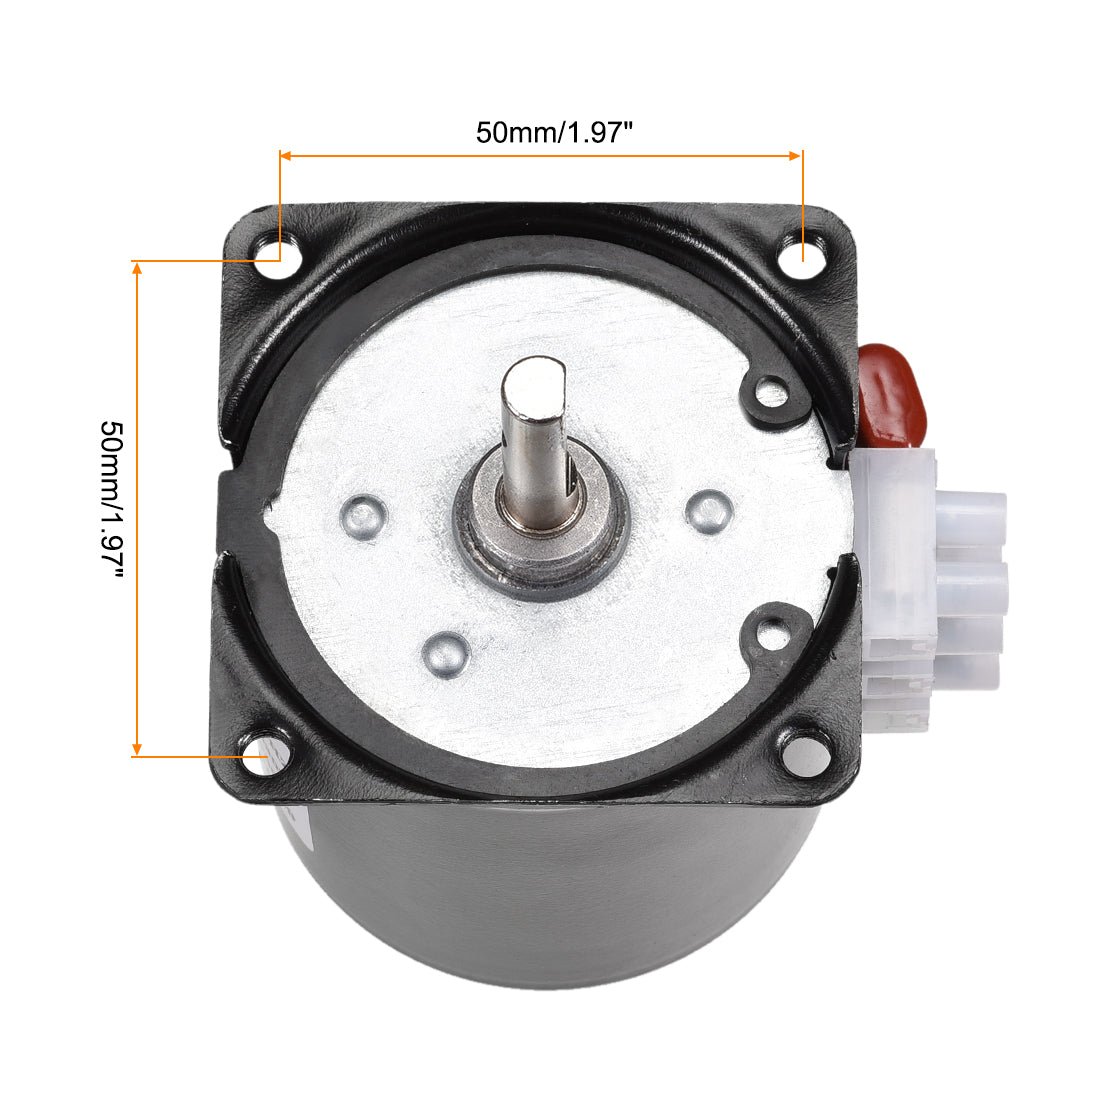 uxcell Uxcell AC 220V Electric Synchronous Motor Metal Gear Turntable /C 10RPM 50-60HZ 14W 7mm Dia Central Shaft with Hole